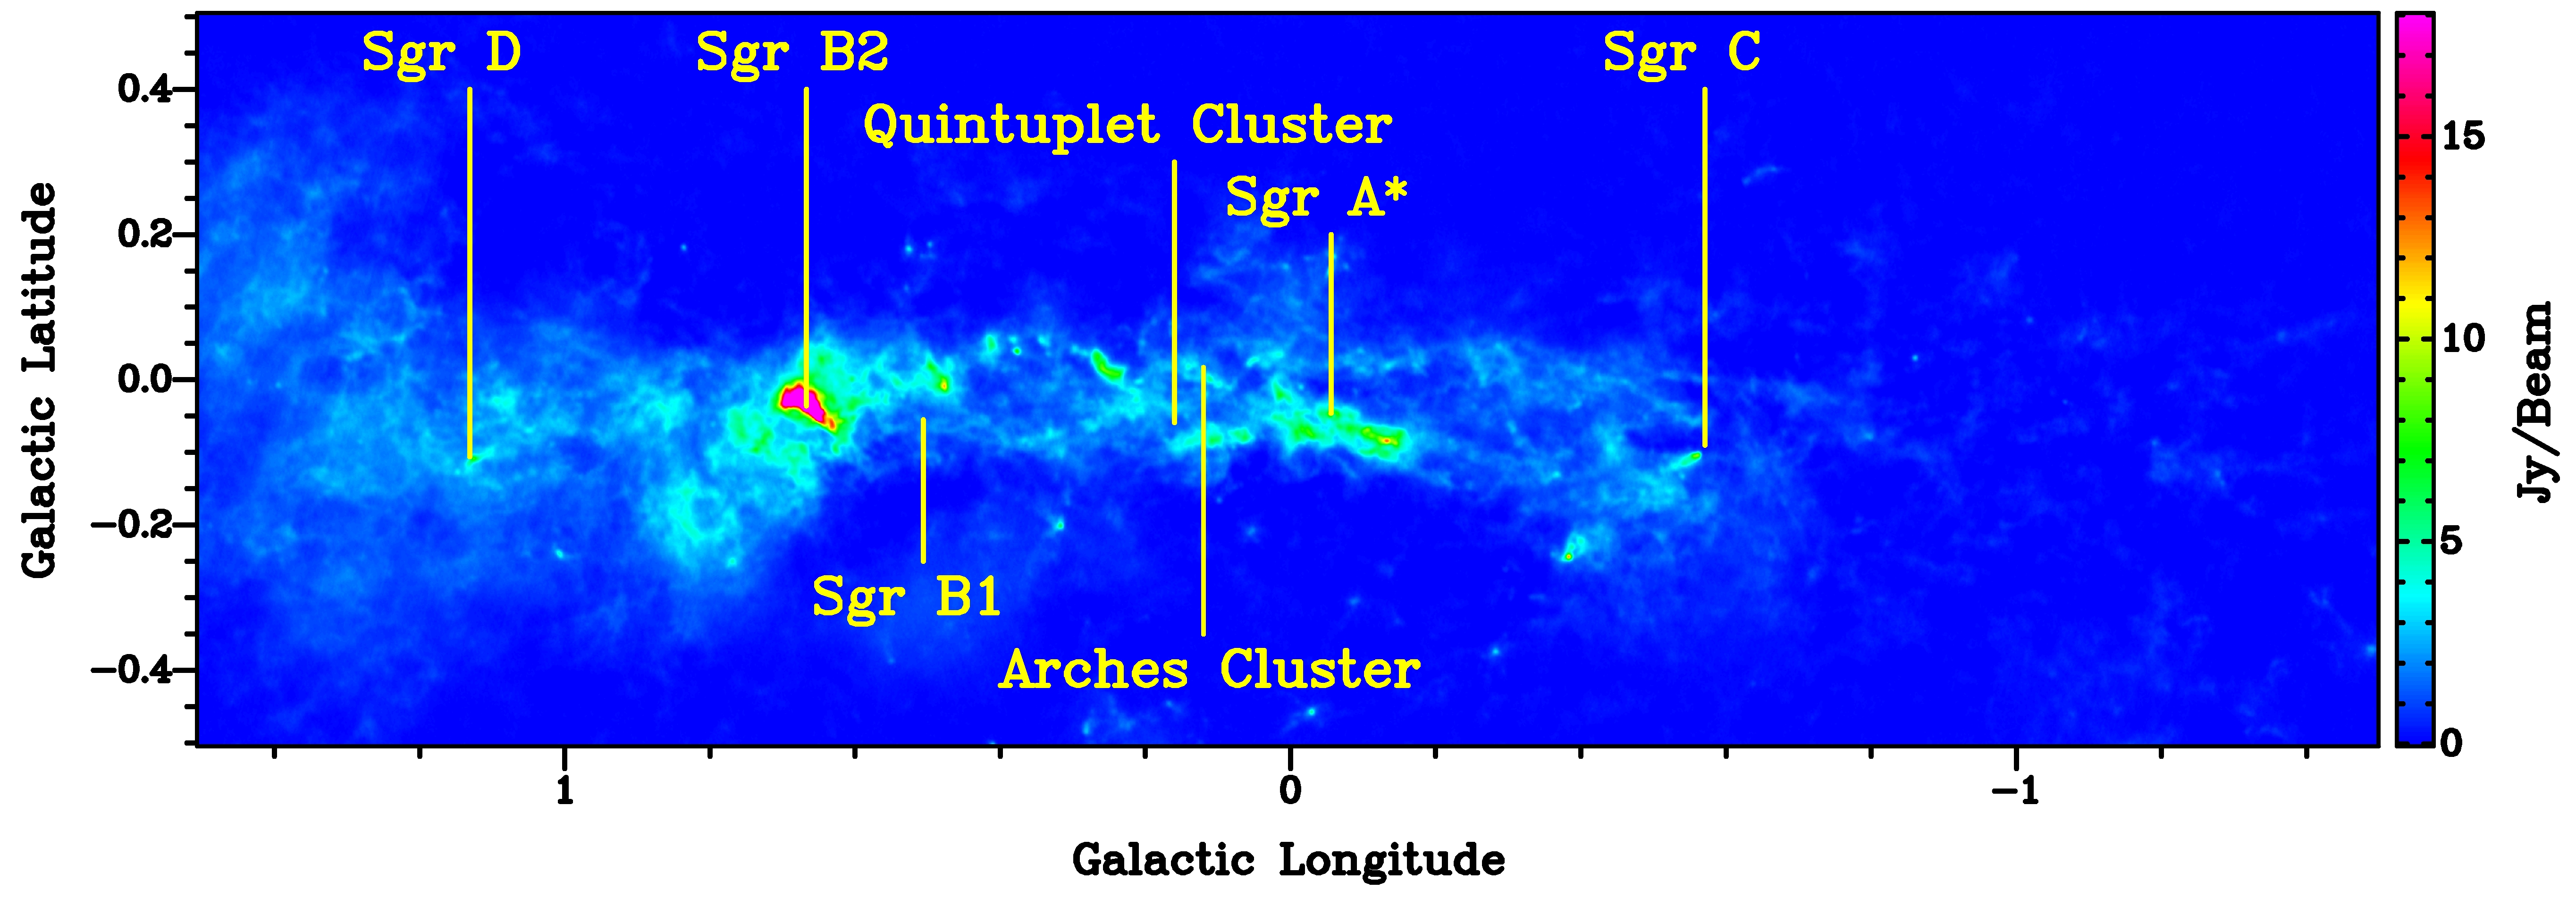 ATLASGAL image at 870 micron of the Central Molecular Zone